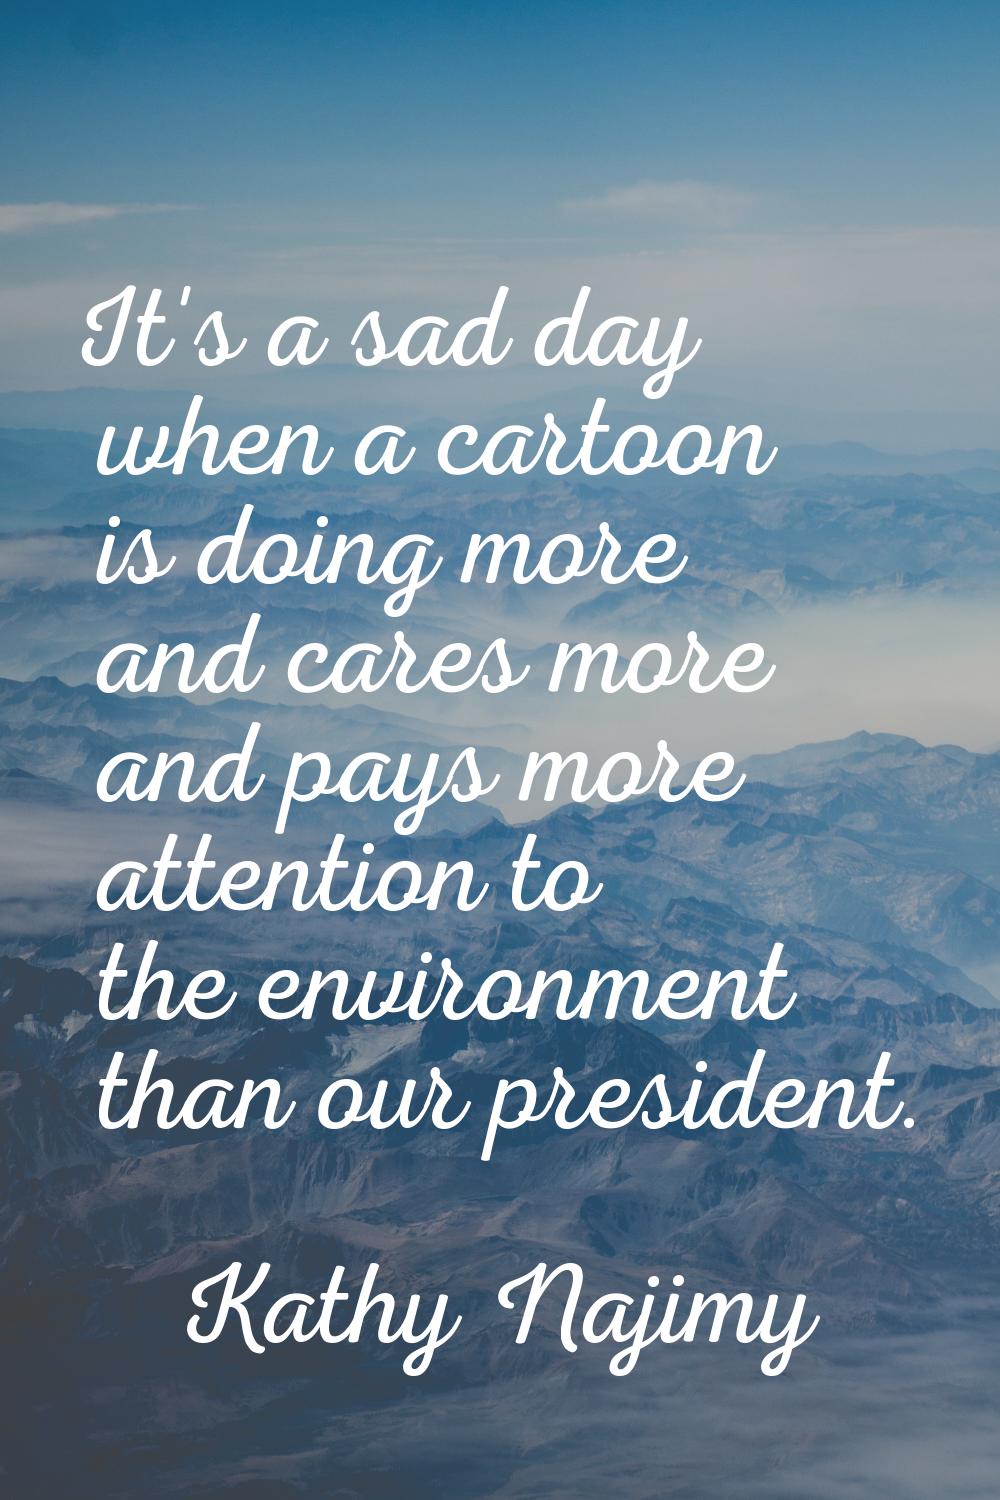 It's a sad day when a cartoon is doing more and cares more and pays more attention to the environme